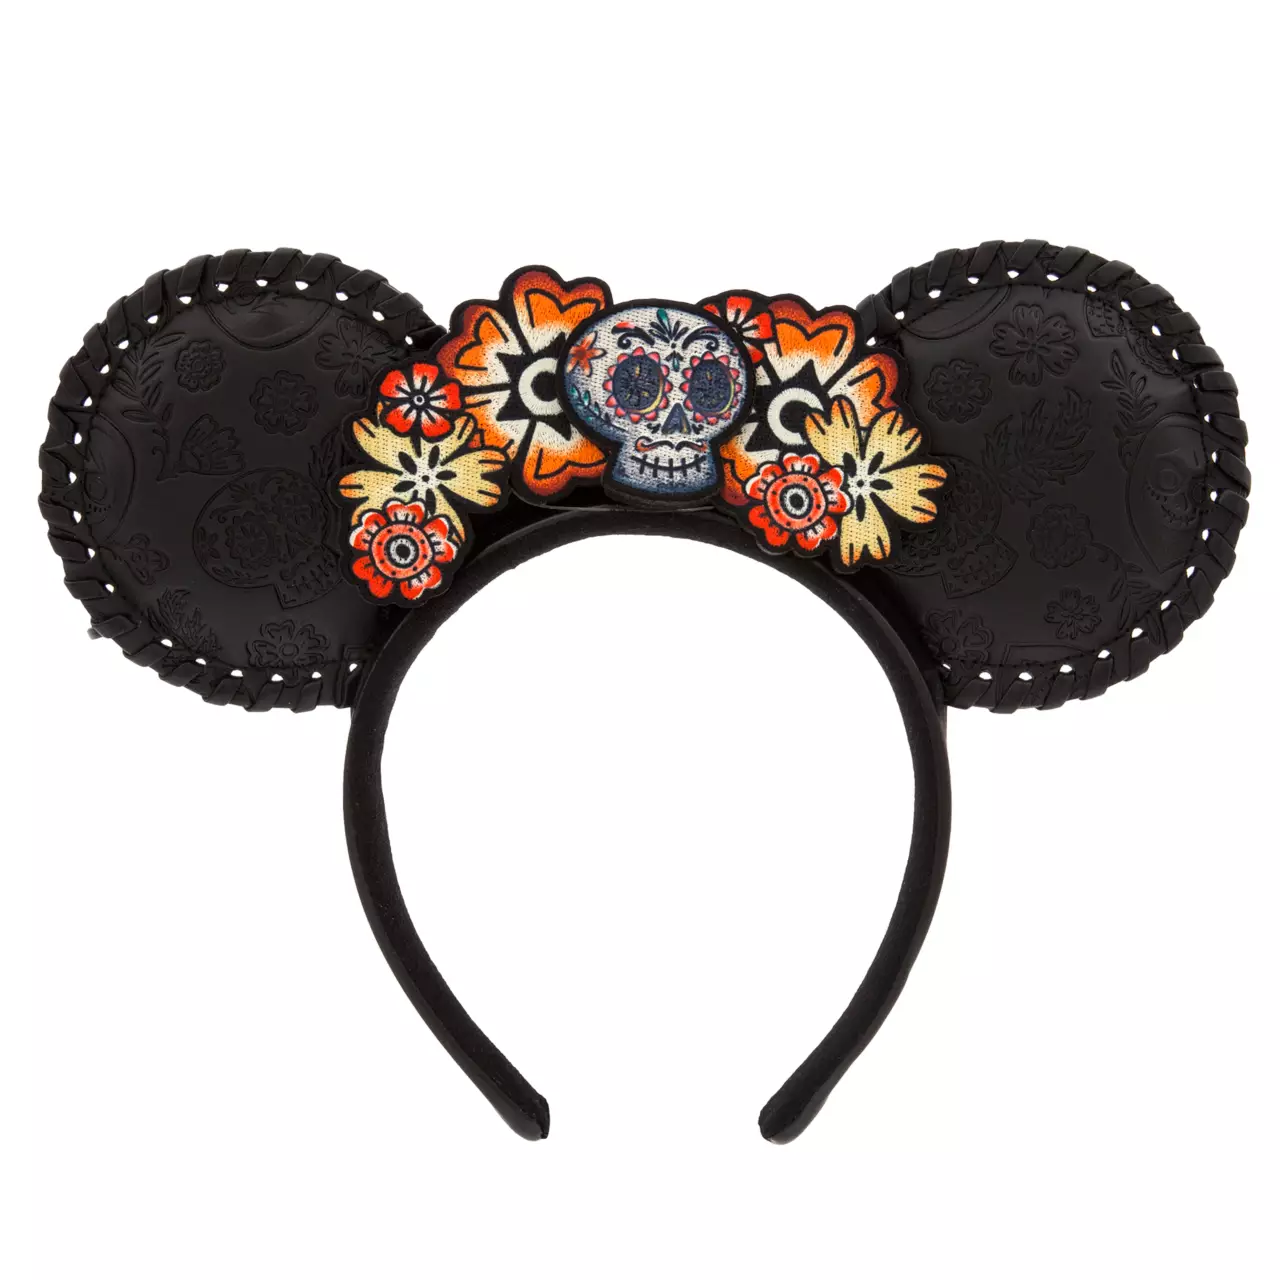 Coco Floral Skull Ears